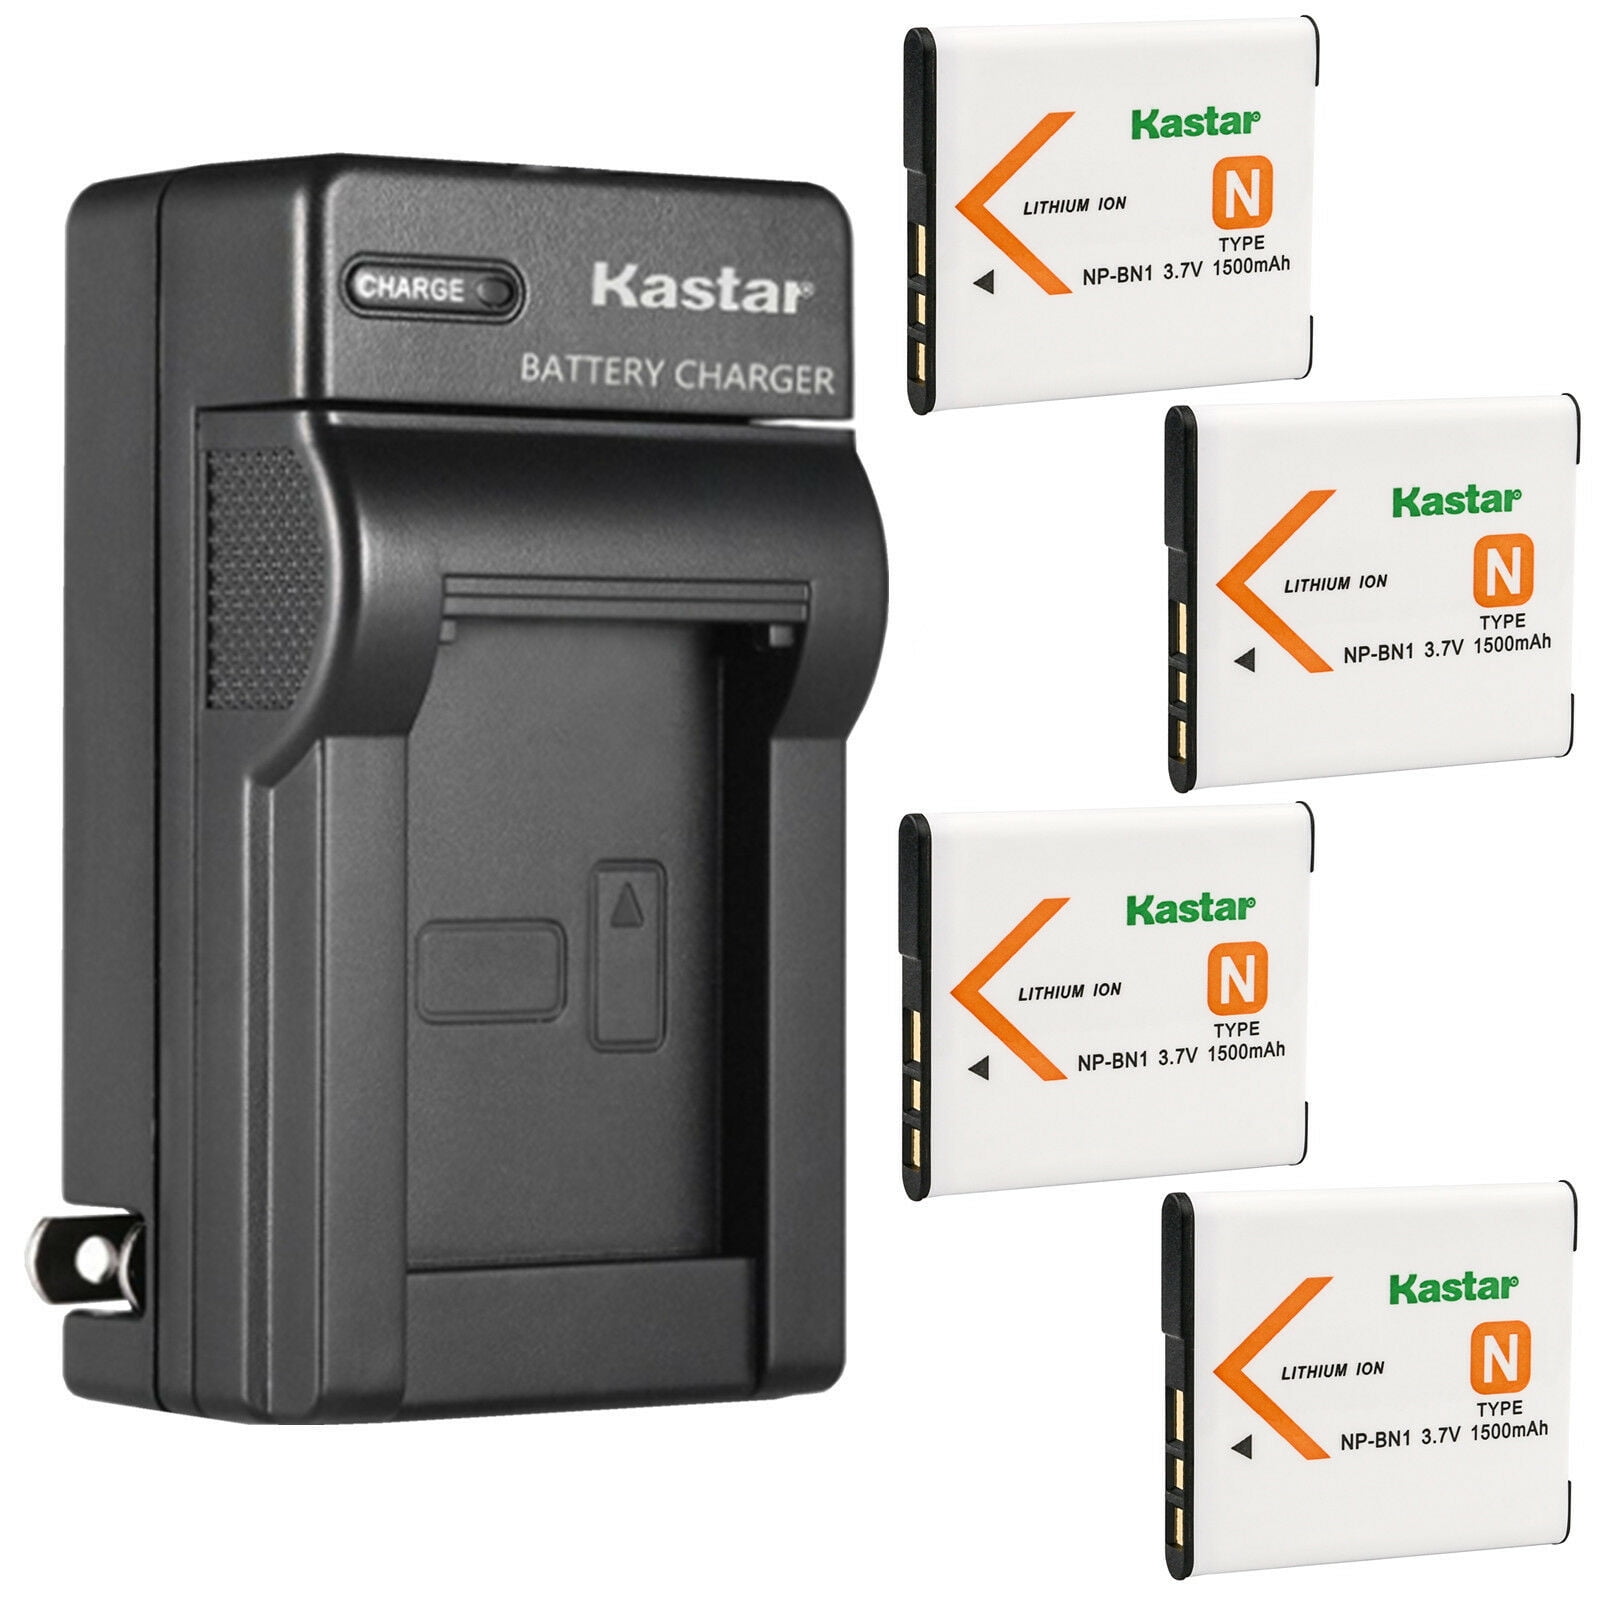 Kastar 4-Pack Battery and AC Wall Charger Replacement for Sony Cyber-shot  DSC-W730, Cyber-shot DSC-W800, Cyber-shot DSC-W810, Cyber-shot DSC-W830, Cyber-shot  DSC-WX5, Cyber-shot DSC-WX7 Cameras 